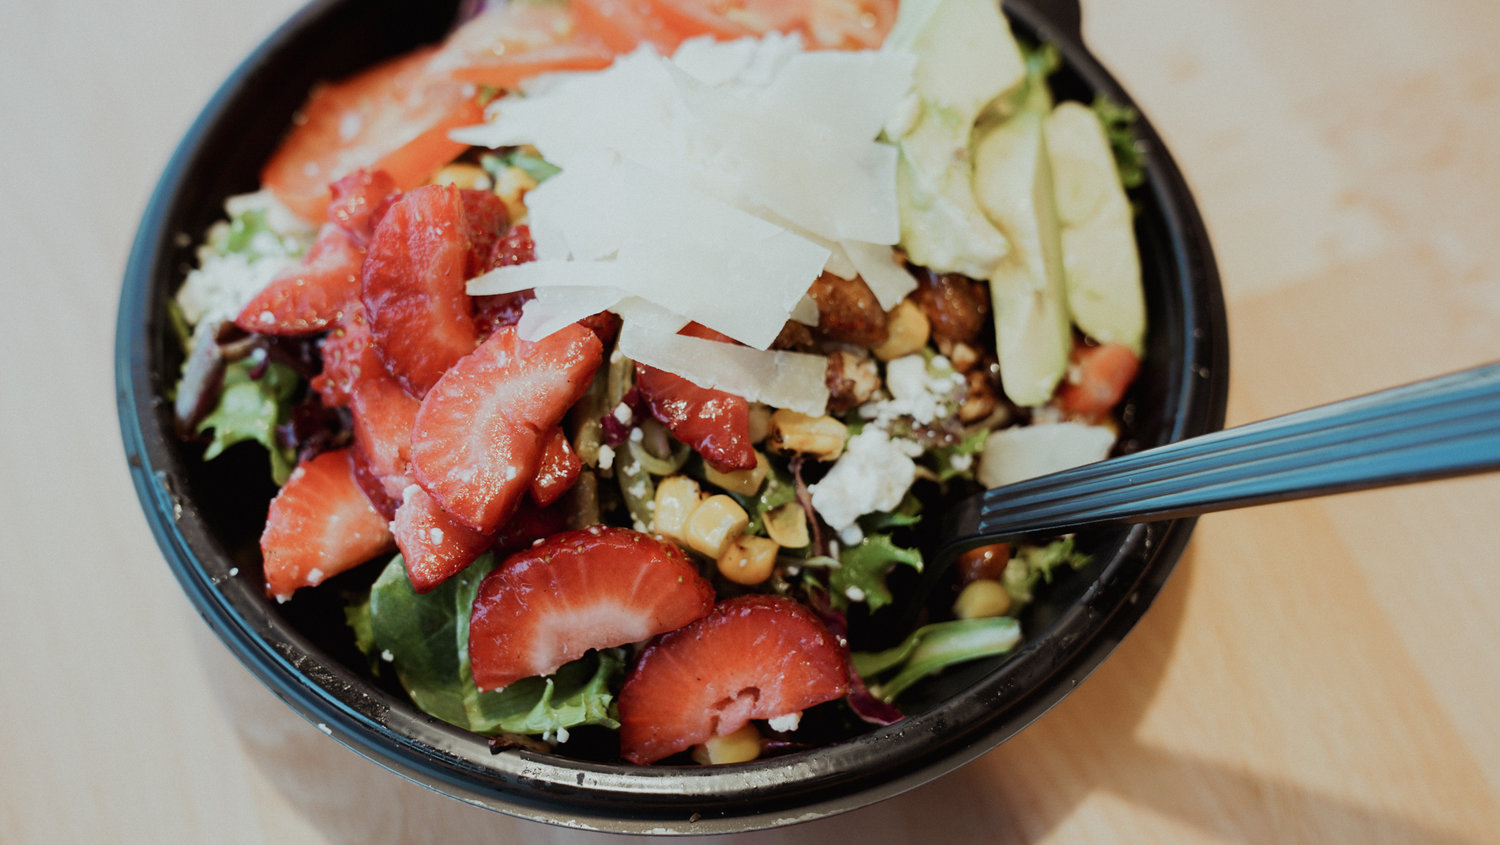 Valerio's Italian Farmer's Market Salad is is piled high with mixed greens, red cabbage, feta, avocado, strawberries, sweet corn, tomato, glazed pecans and a lemon basil dressing.